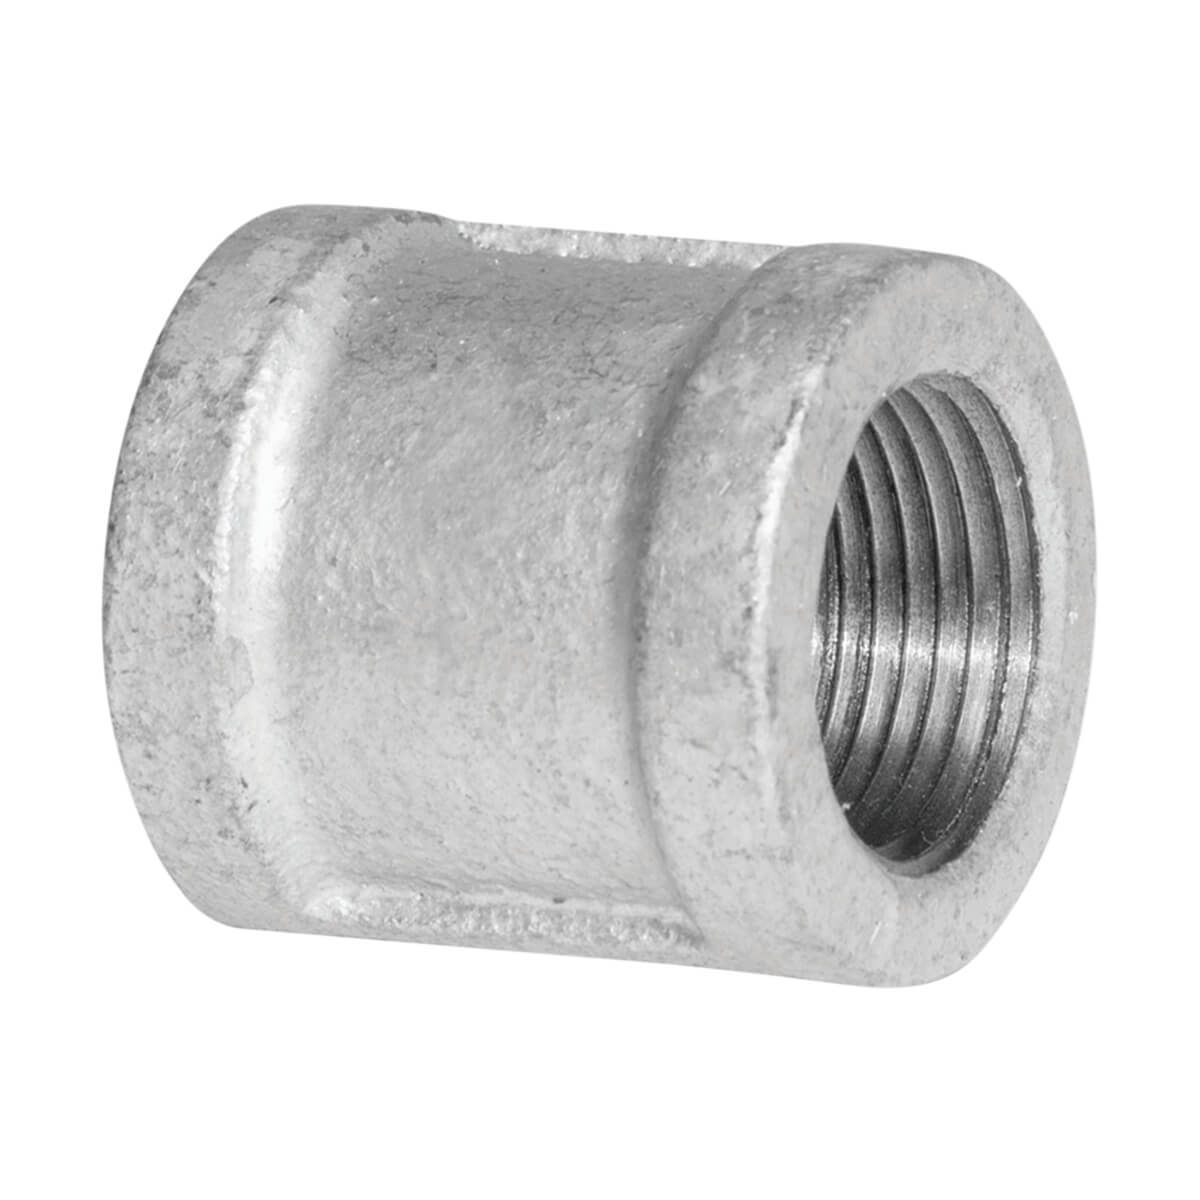 Fitting Galvanized Iron Coupling - 1-1/4-in